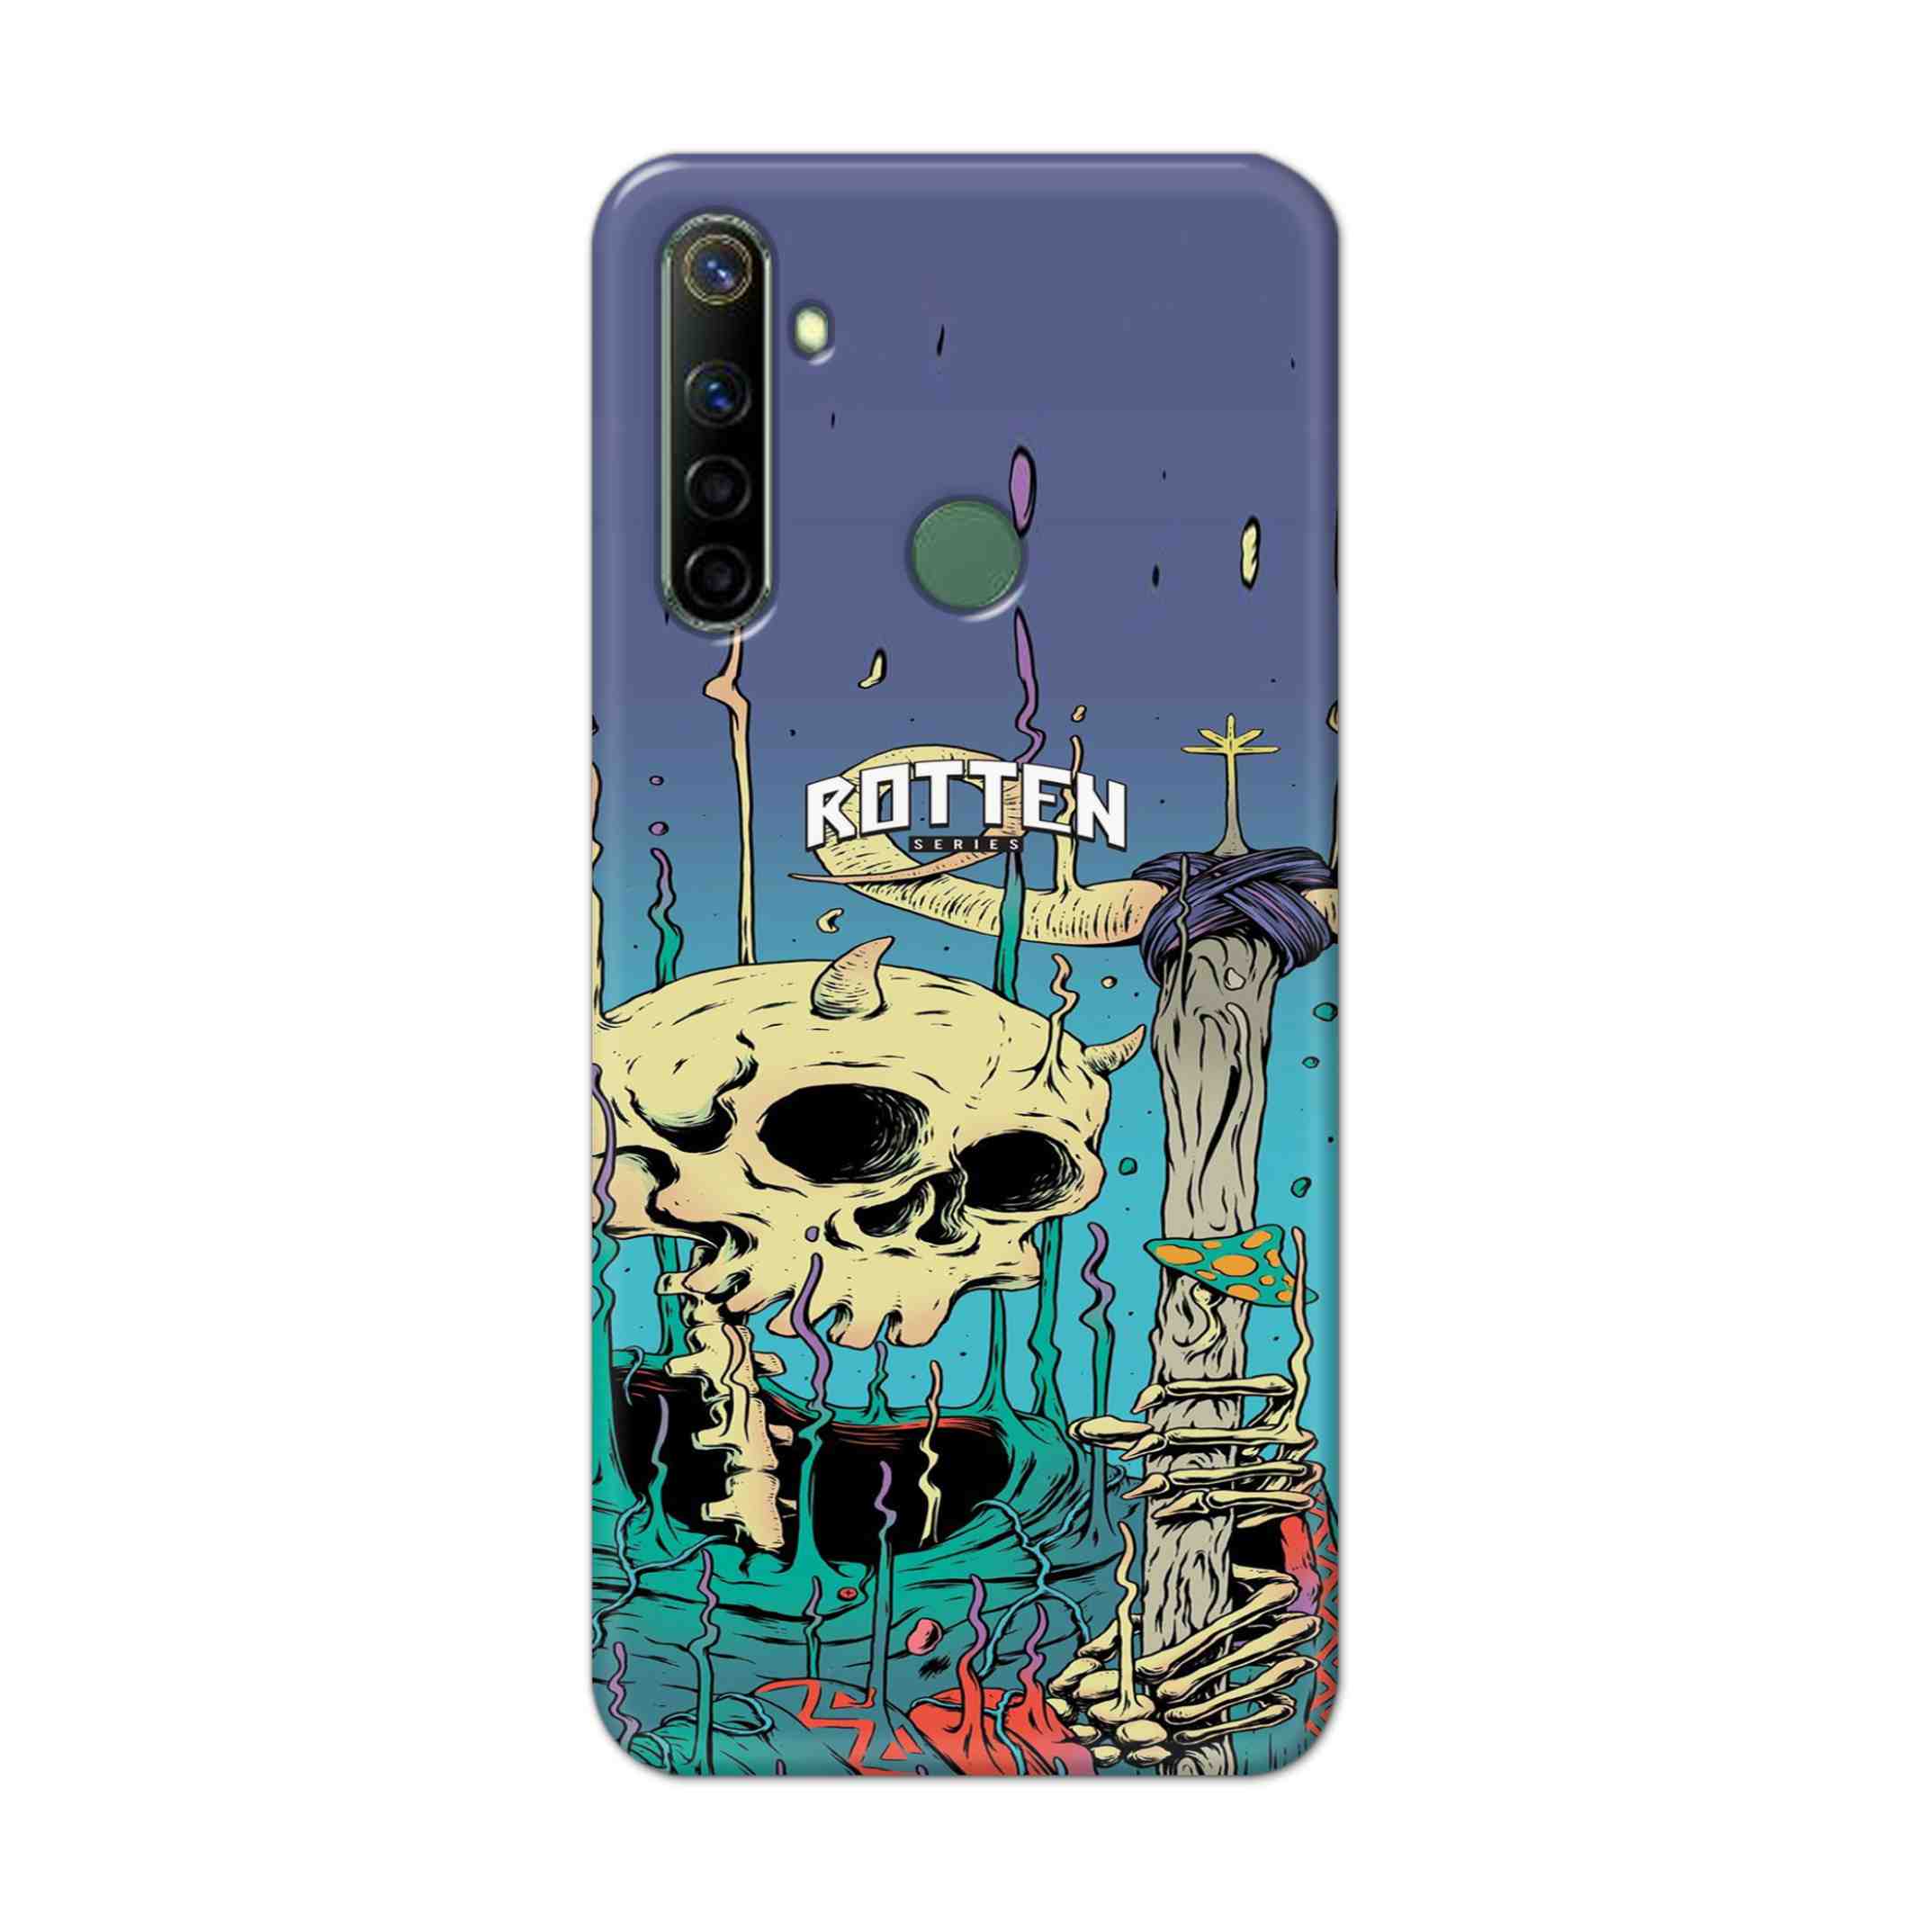 Buy Skull Hard Back Mobile Phone Case Cover For Realme Narzo 10a Online